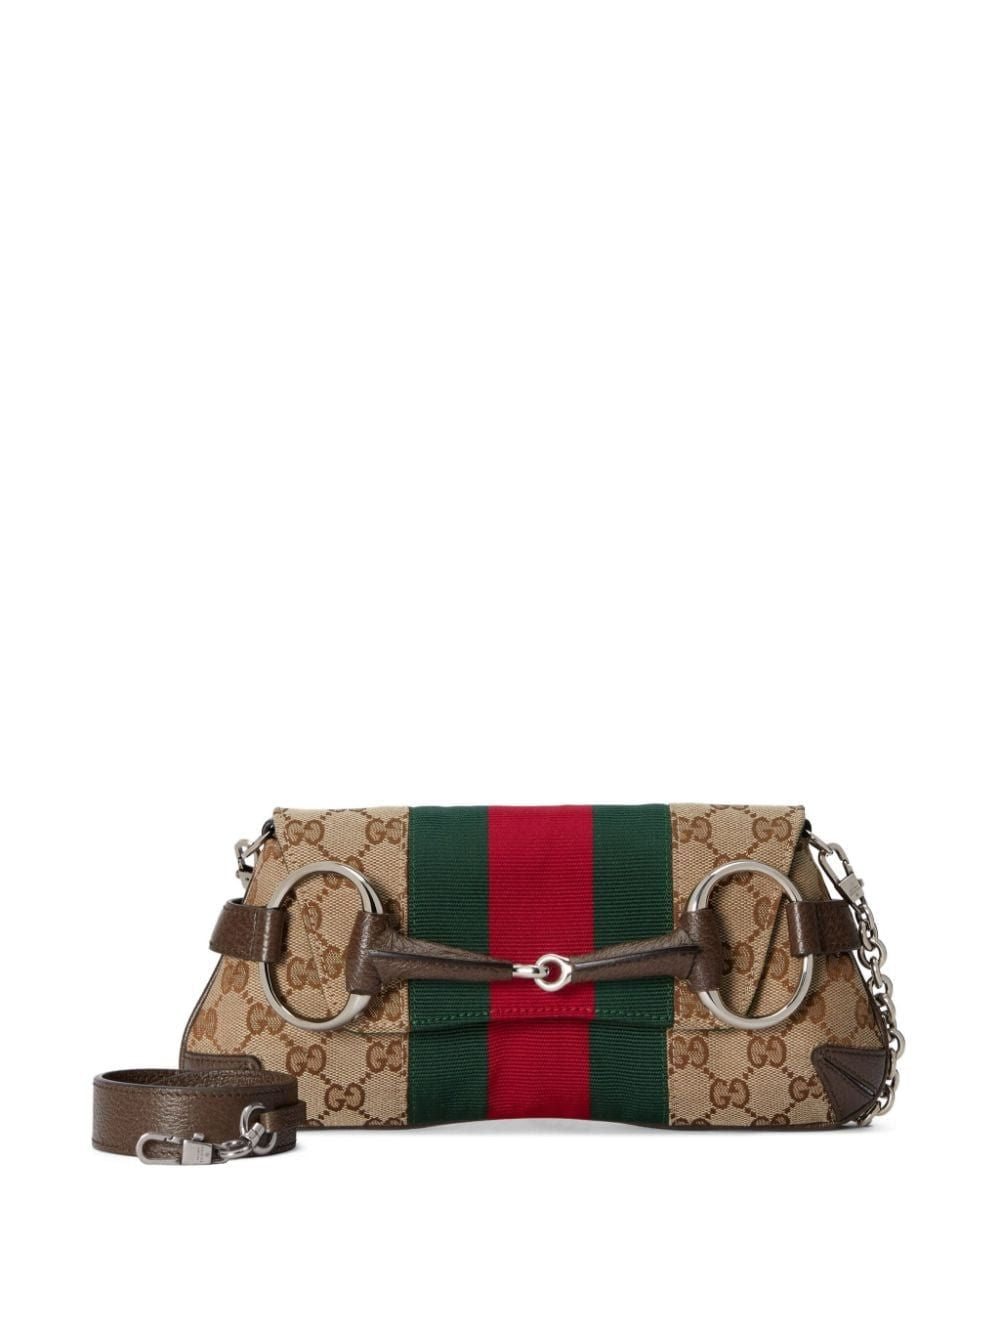 The Tom Ford-Era Gucci Horsebit Clutch Is Back and Better Than Ever